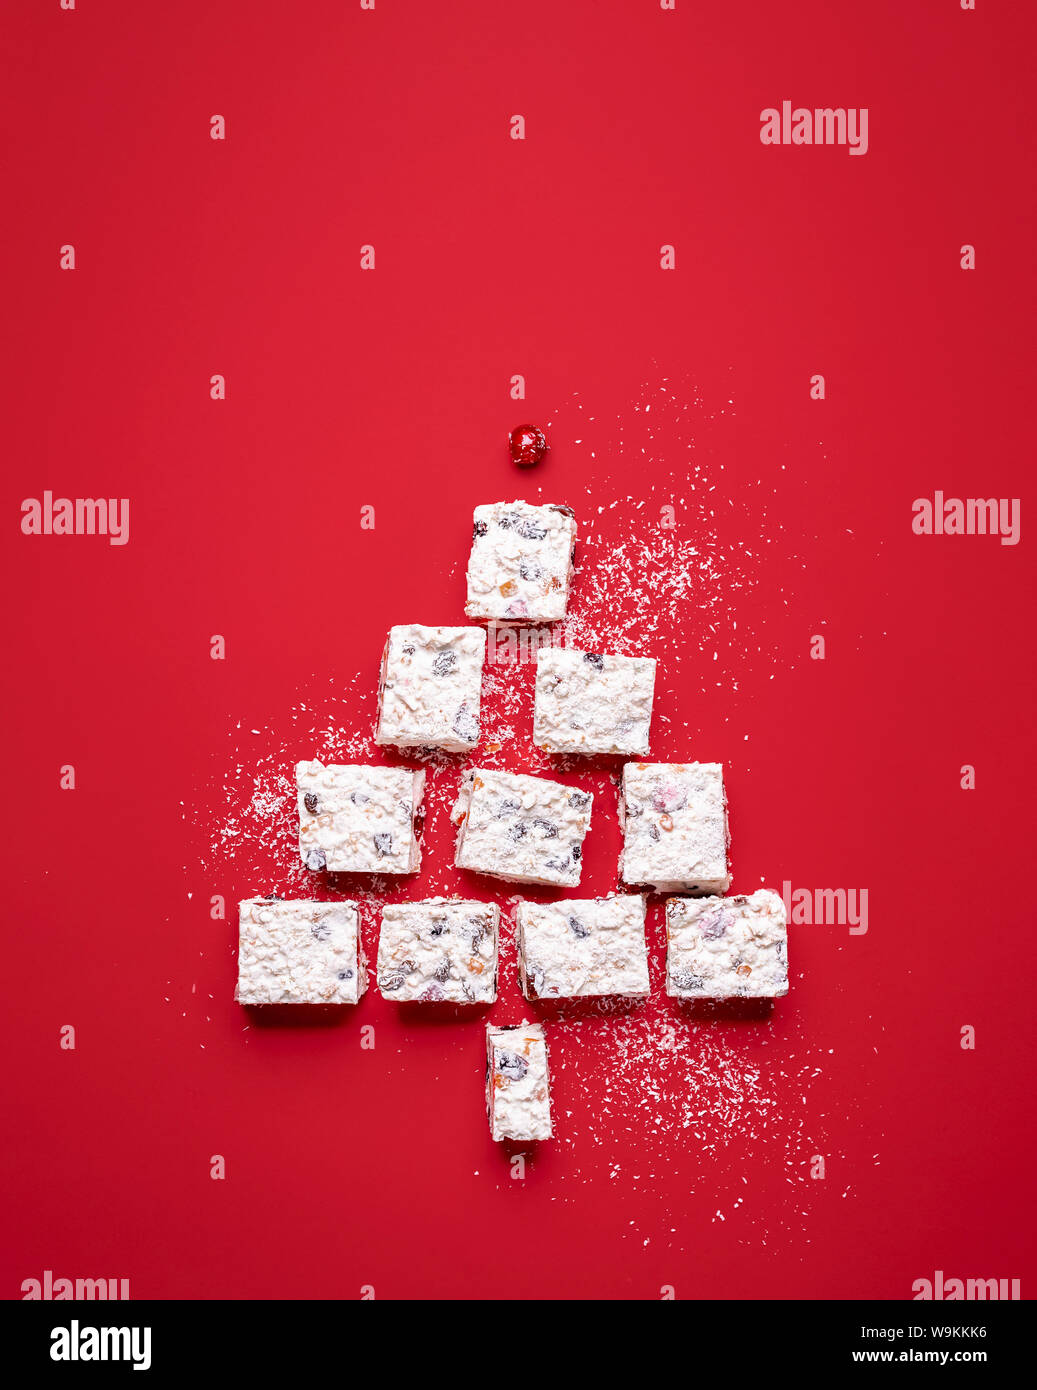 Christmas tree shape made of coconut and dried fruit dessert. Australian traditional Xmas food. White Christmas cake slices in a tree shape. Stock Photo